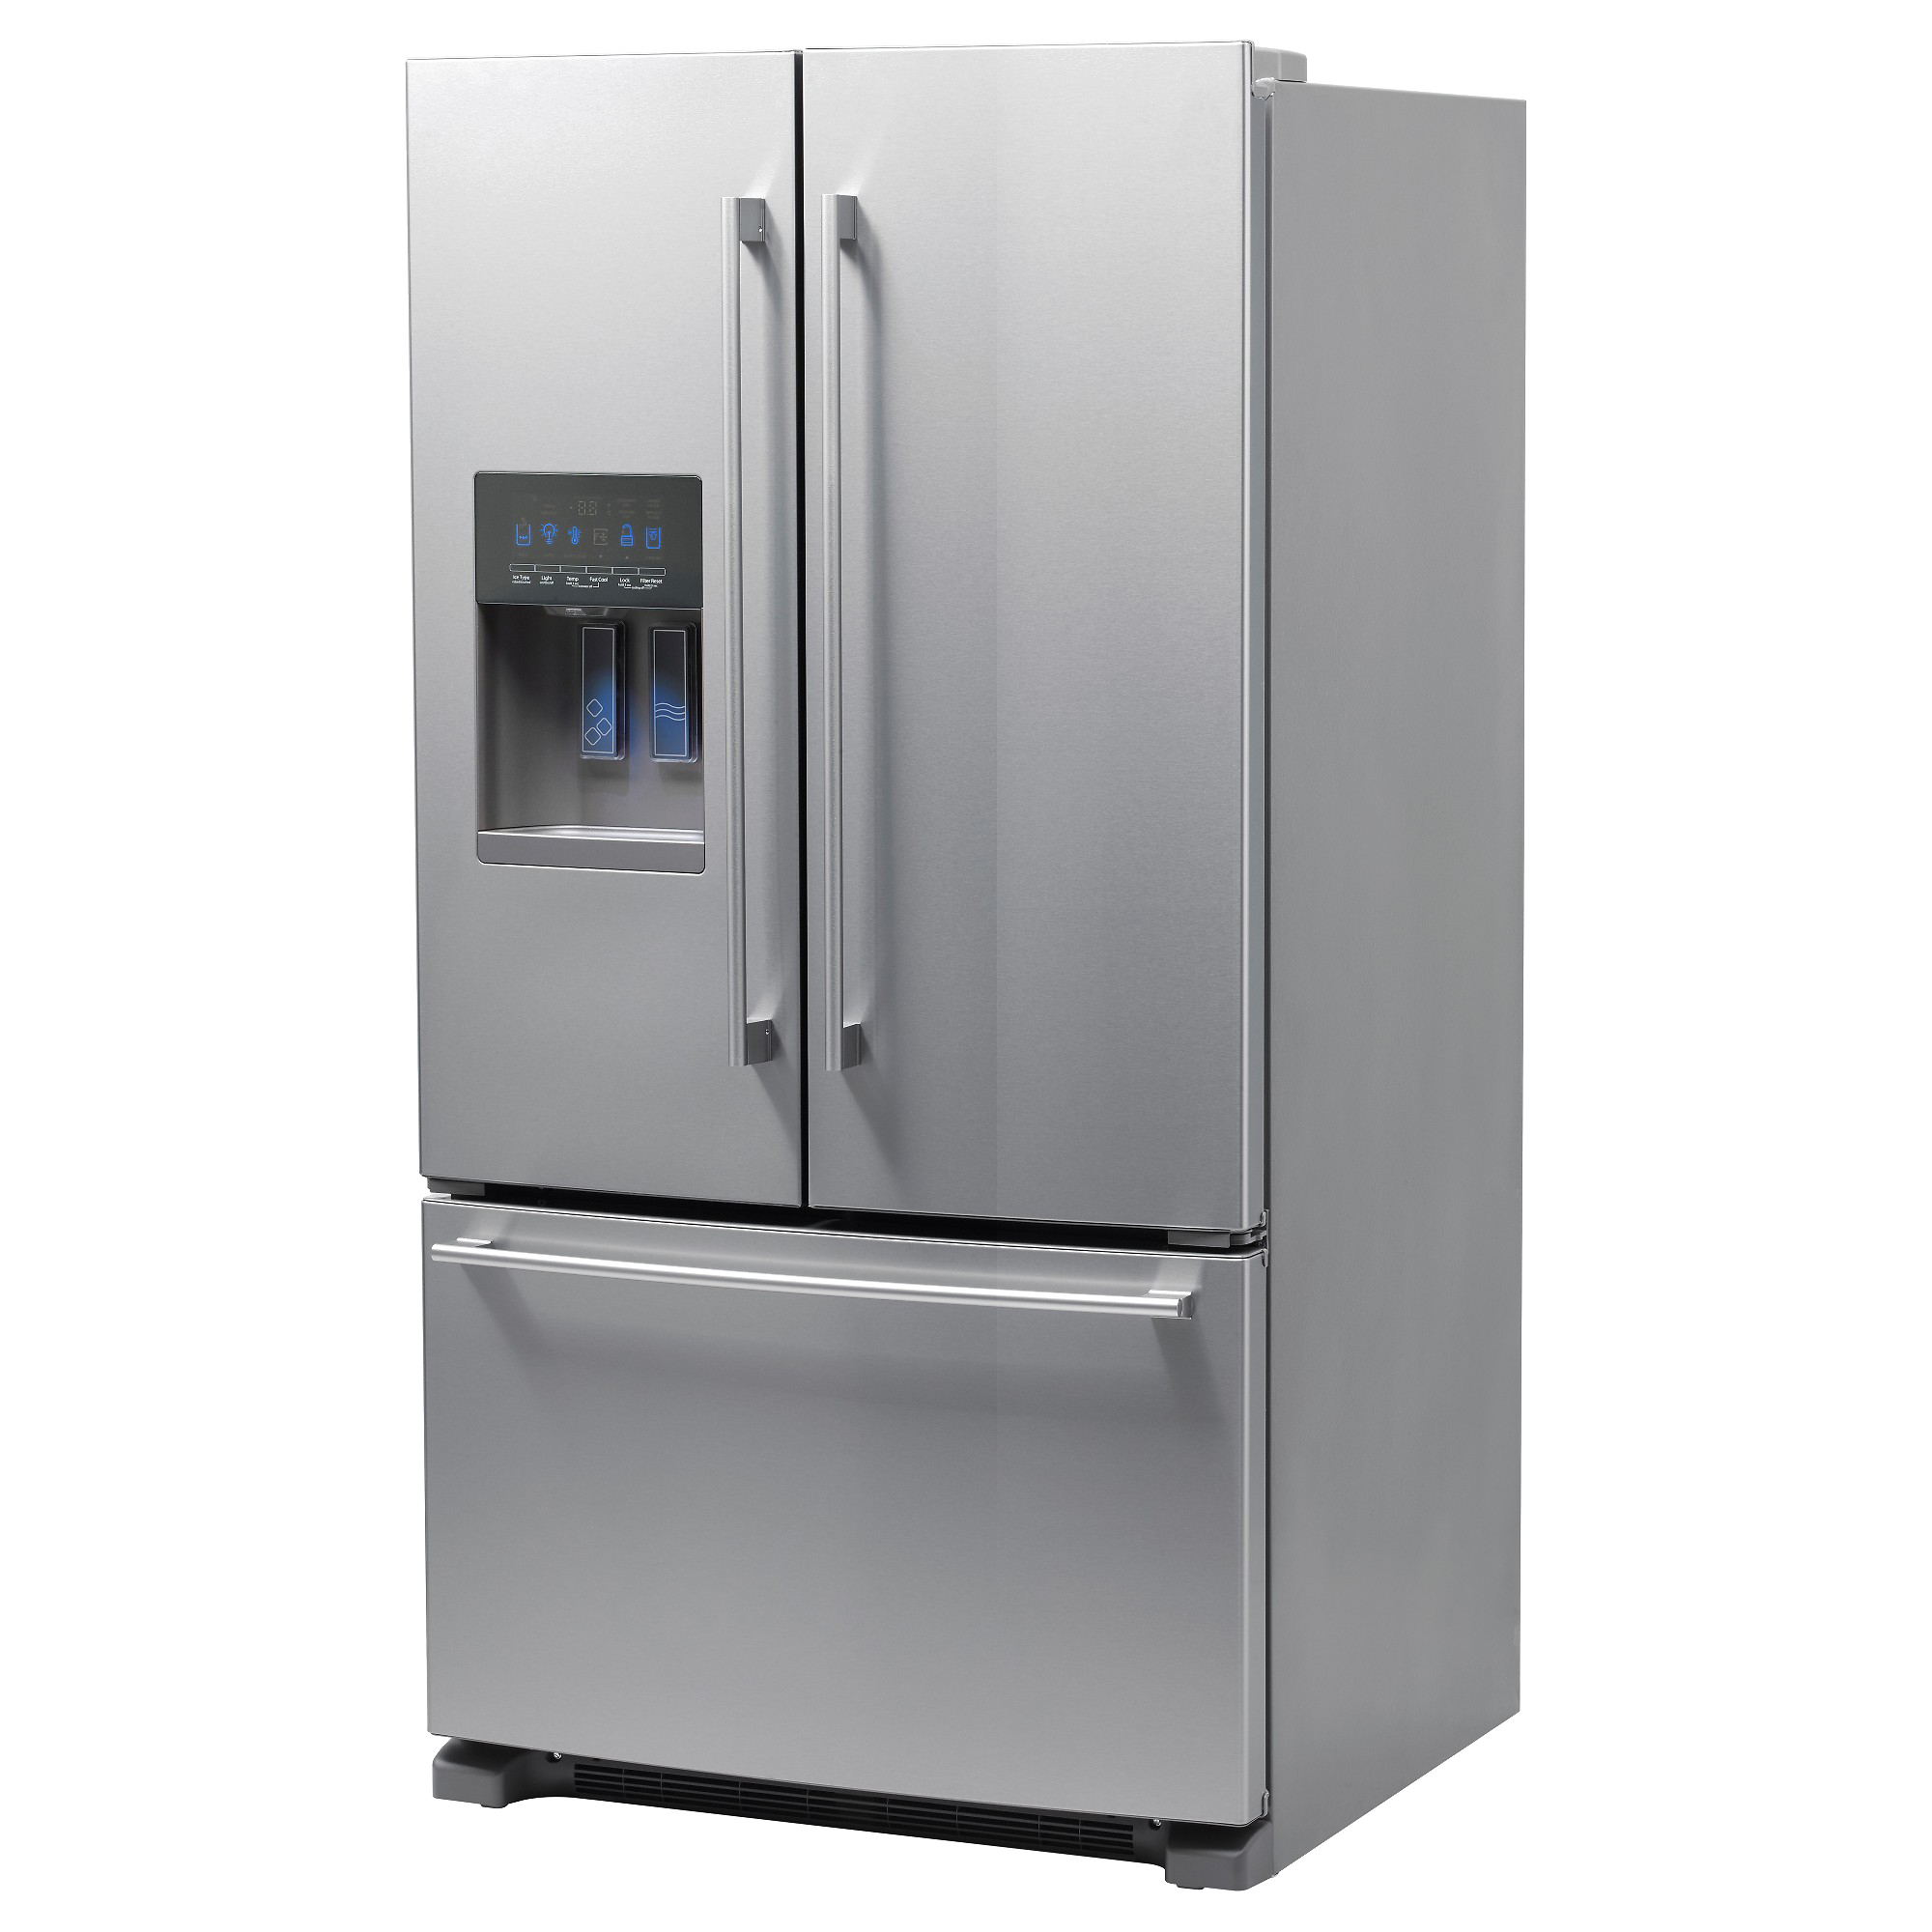 Refrigerator Image Free Clipart HQ PNG Image